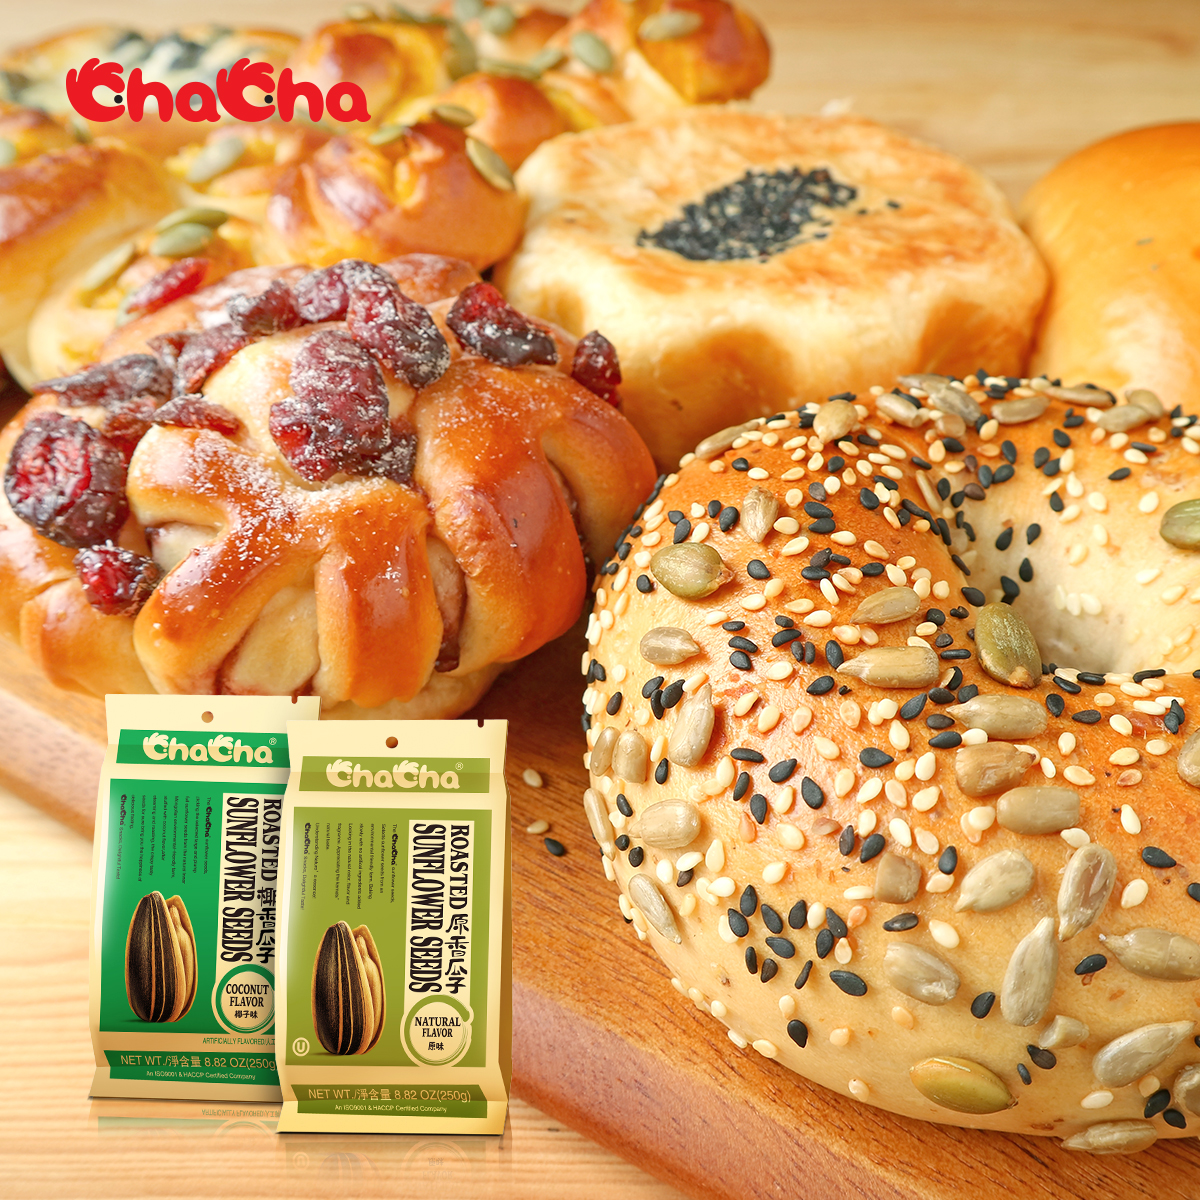 #ChaChaYummy   Try adding a little sunflower seed when baking bread; you will get a new delicious flavor! #ChaChaMoment